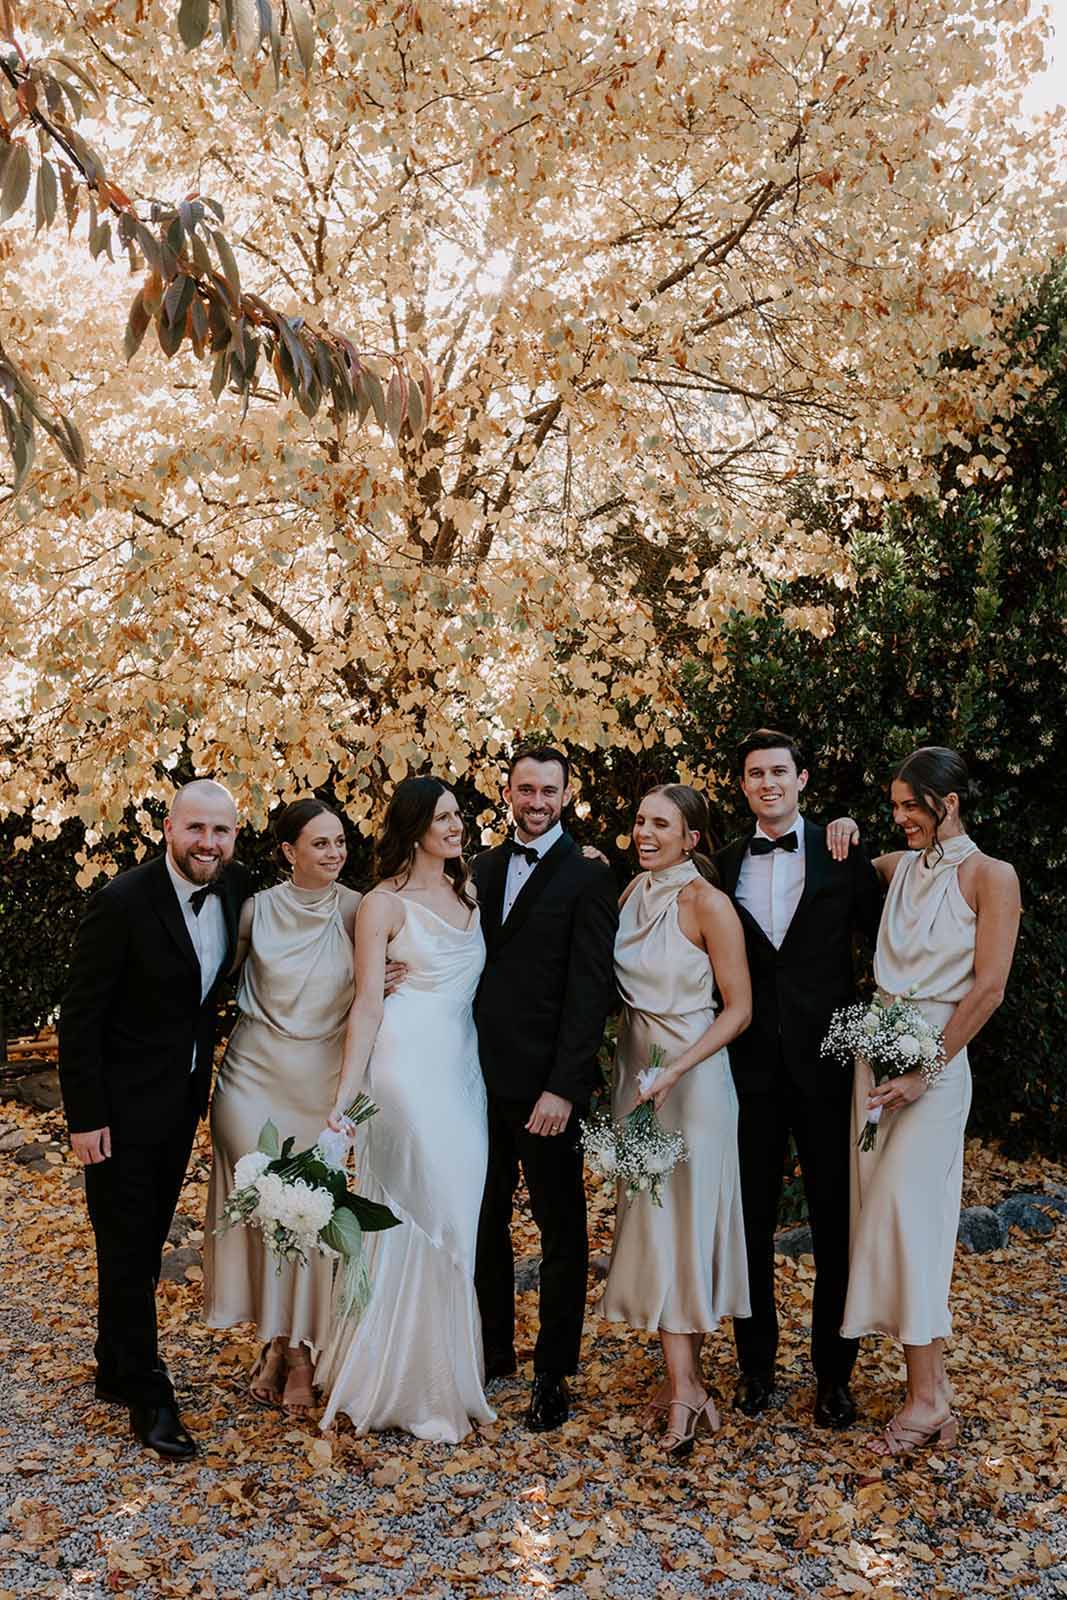 Bride and groom with their loved ones and family members